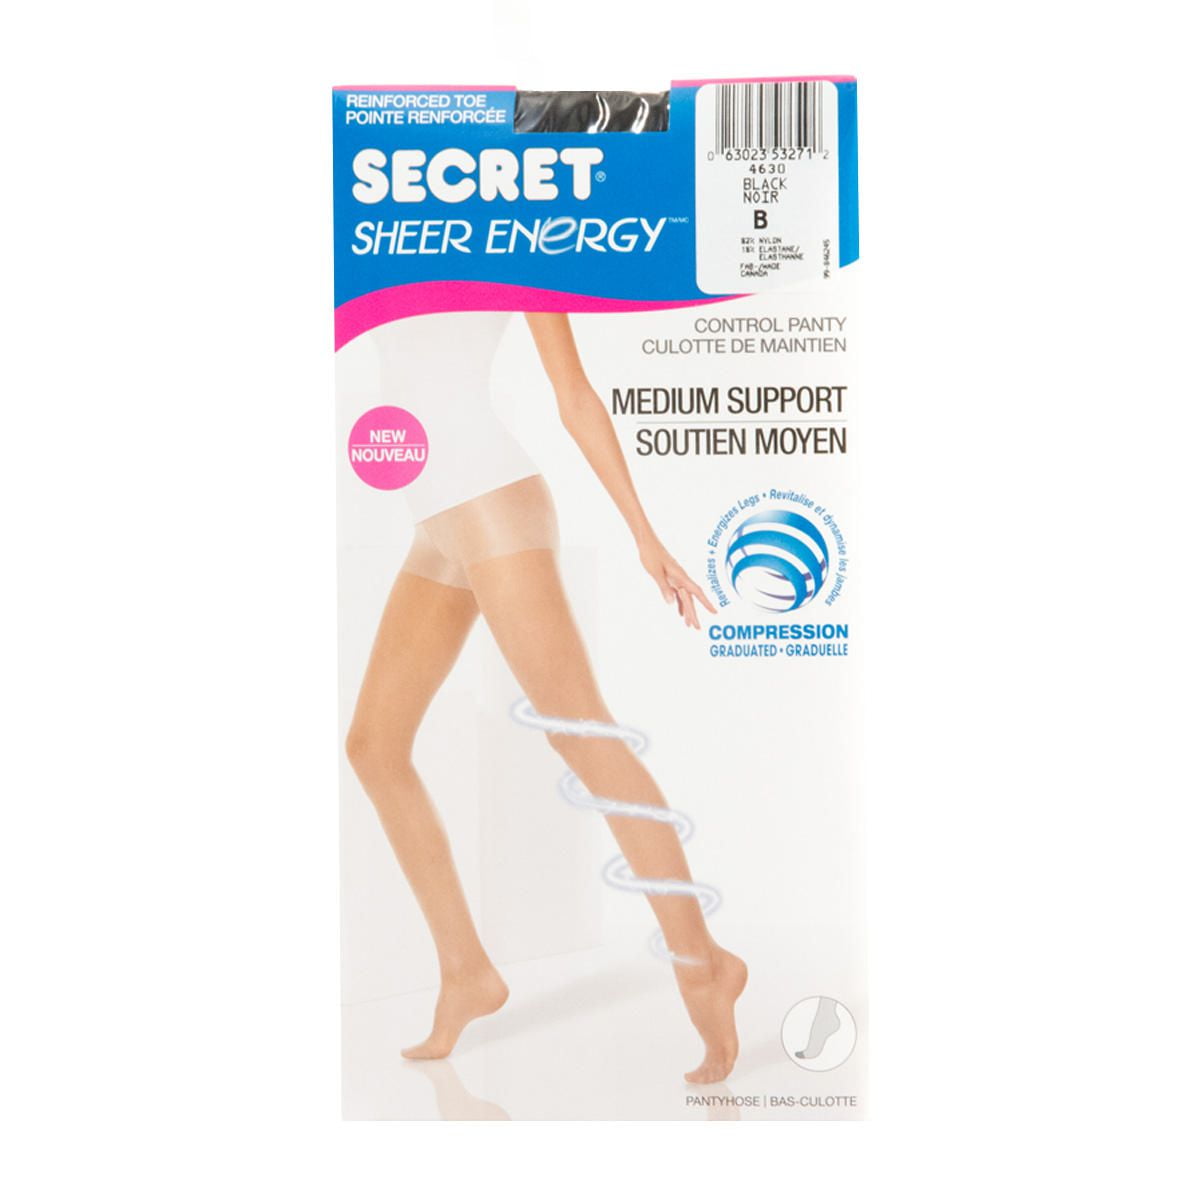 Leggs Womens Sheer Enery Active Support Enhanced Panty - Apparel Direct  Distributor